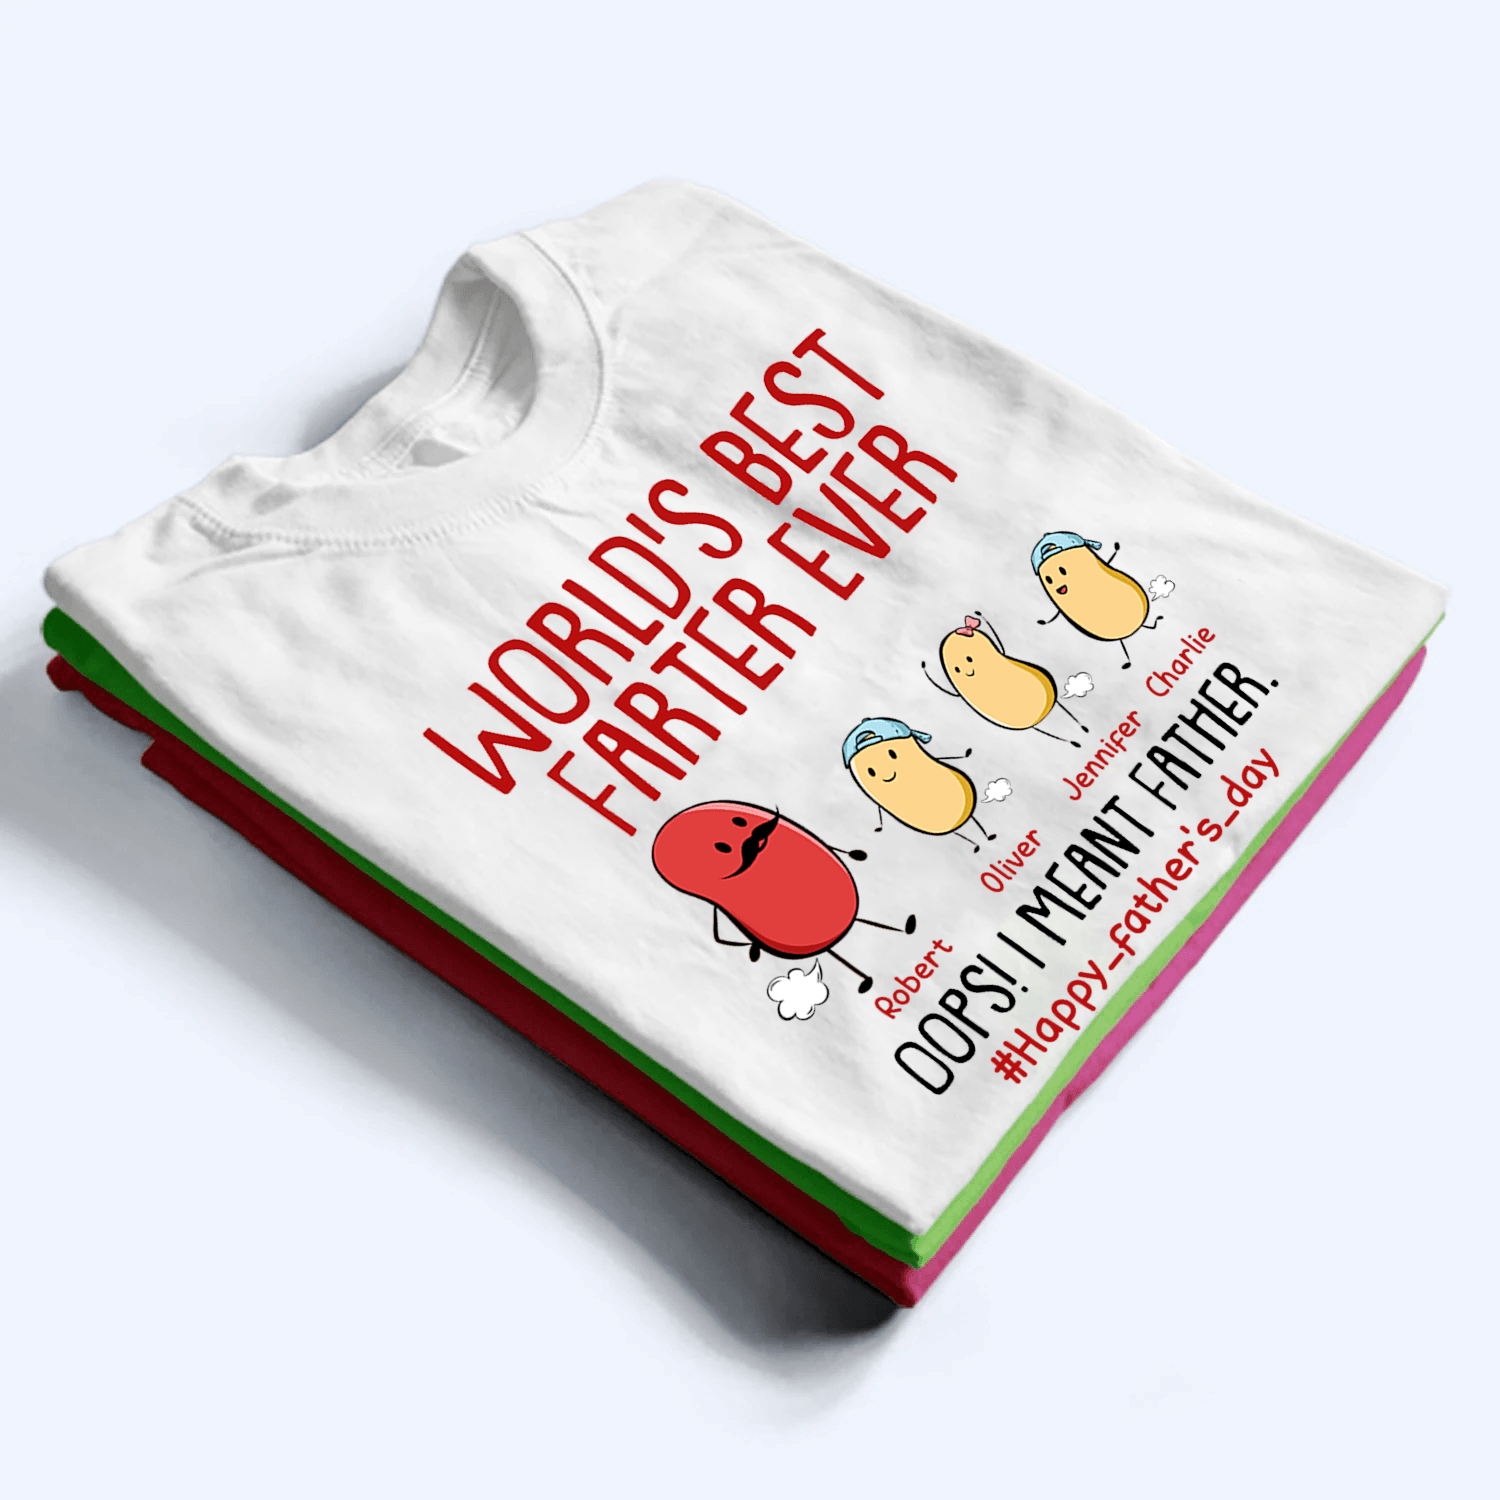 World's Best Farter Ever I Mean Father - Personalized Custom T Shirt - Father's Day Gift for Dad, Papa, Grandpa, Daddy, Dada